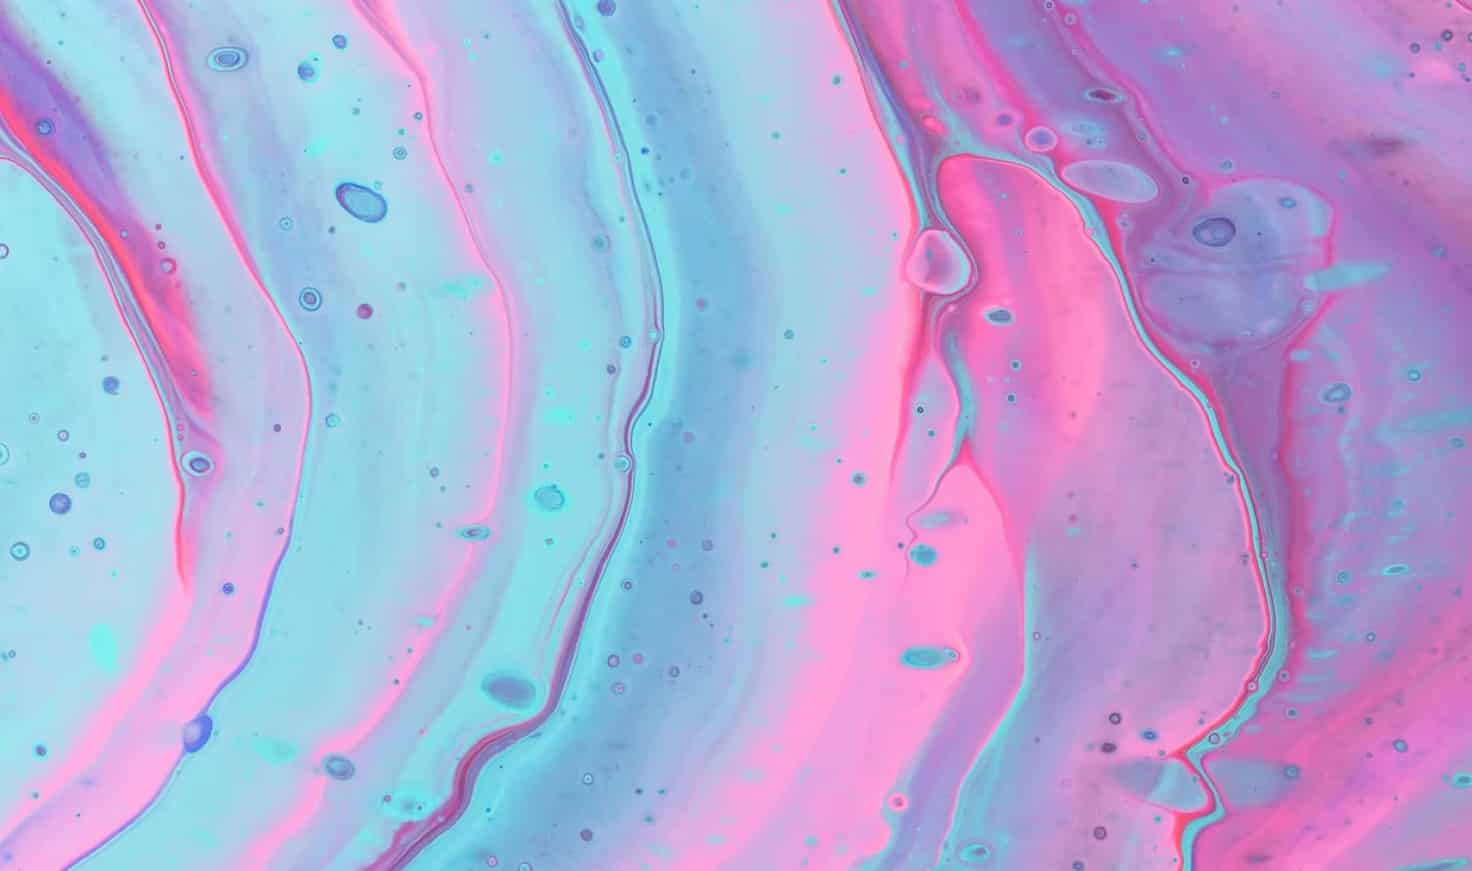 Iridescent ripples of a bright blue and pink liquid